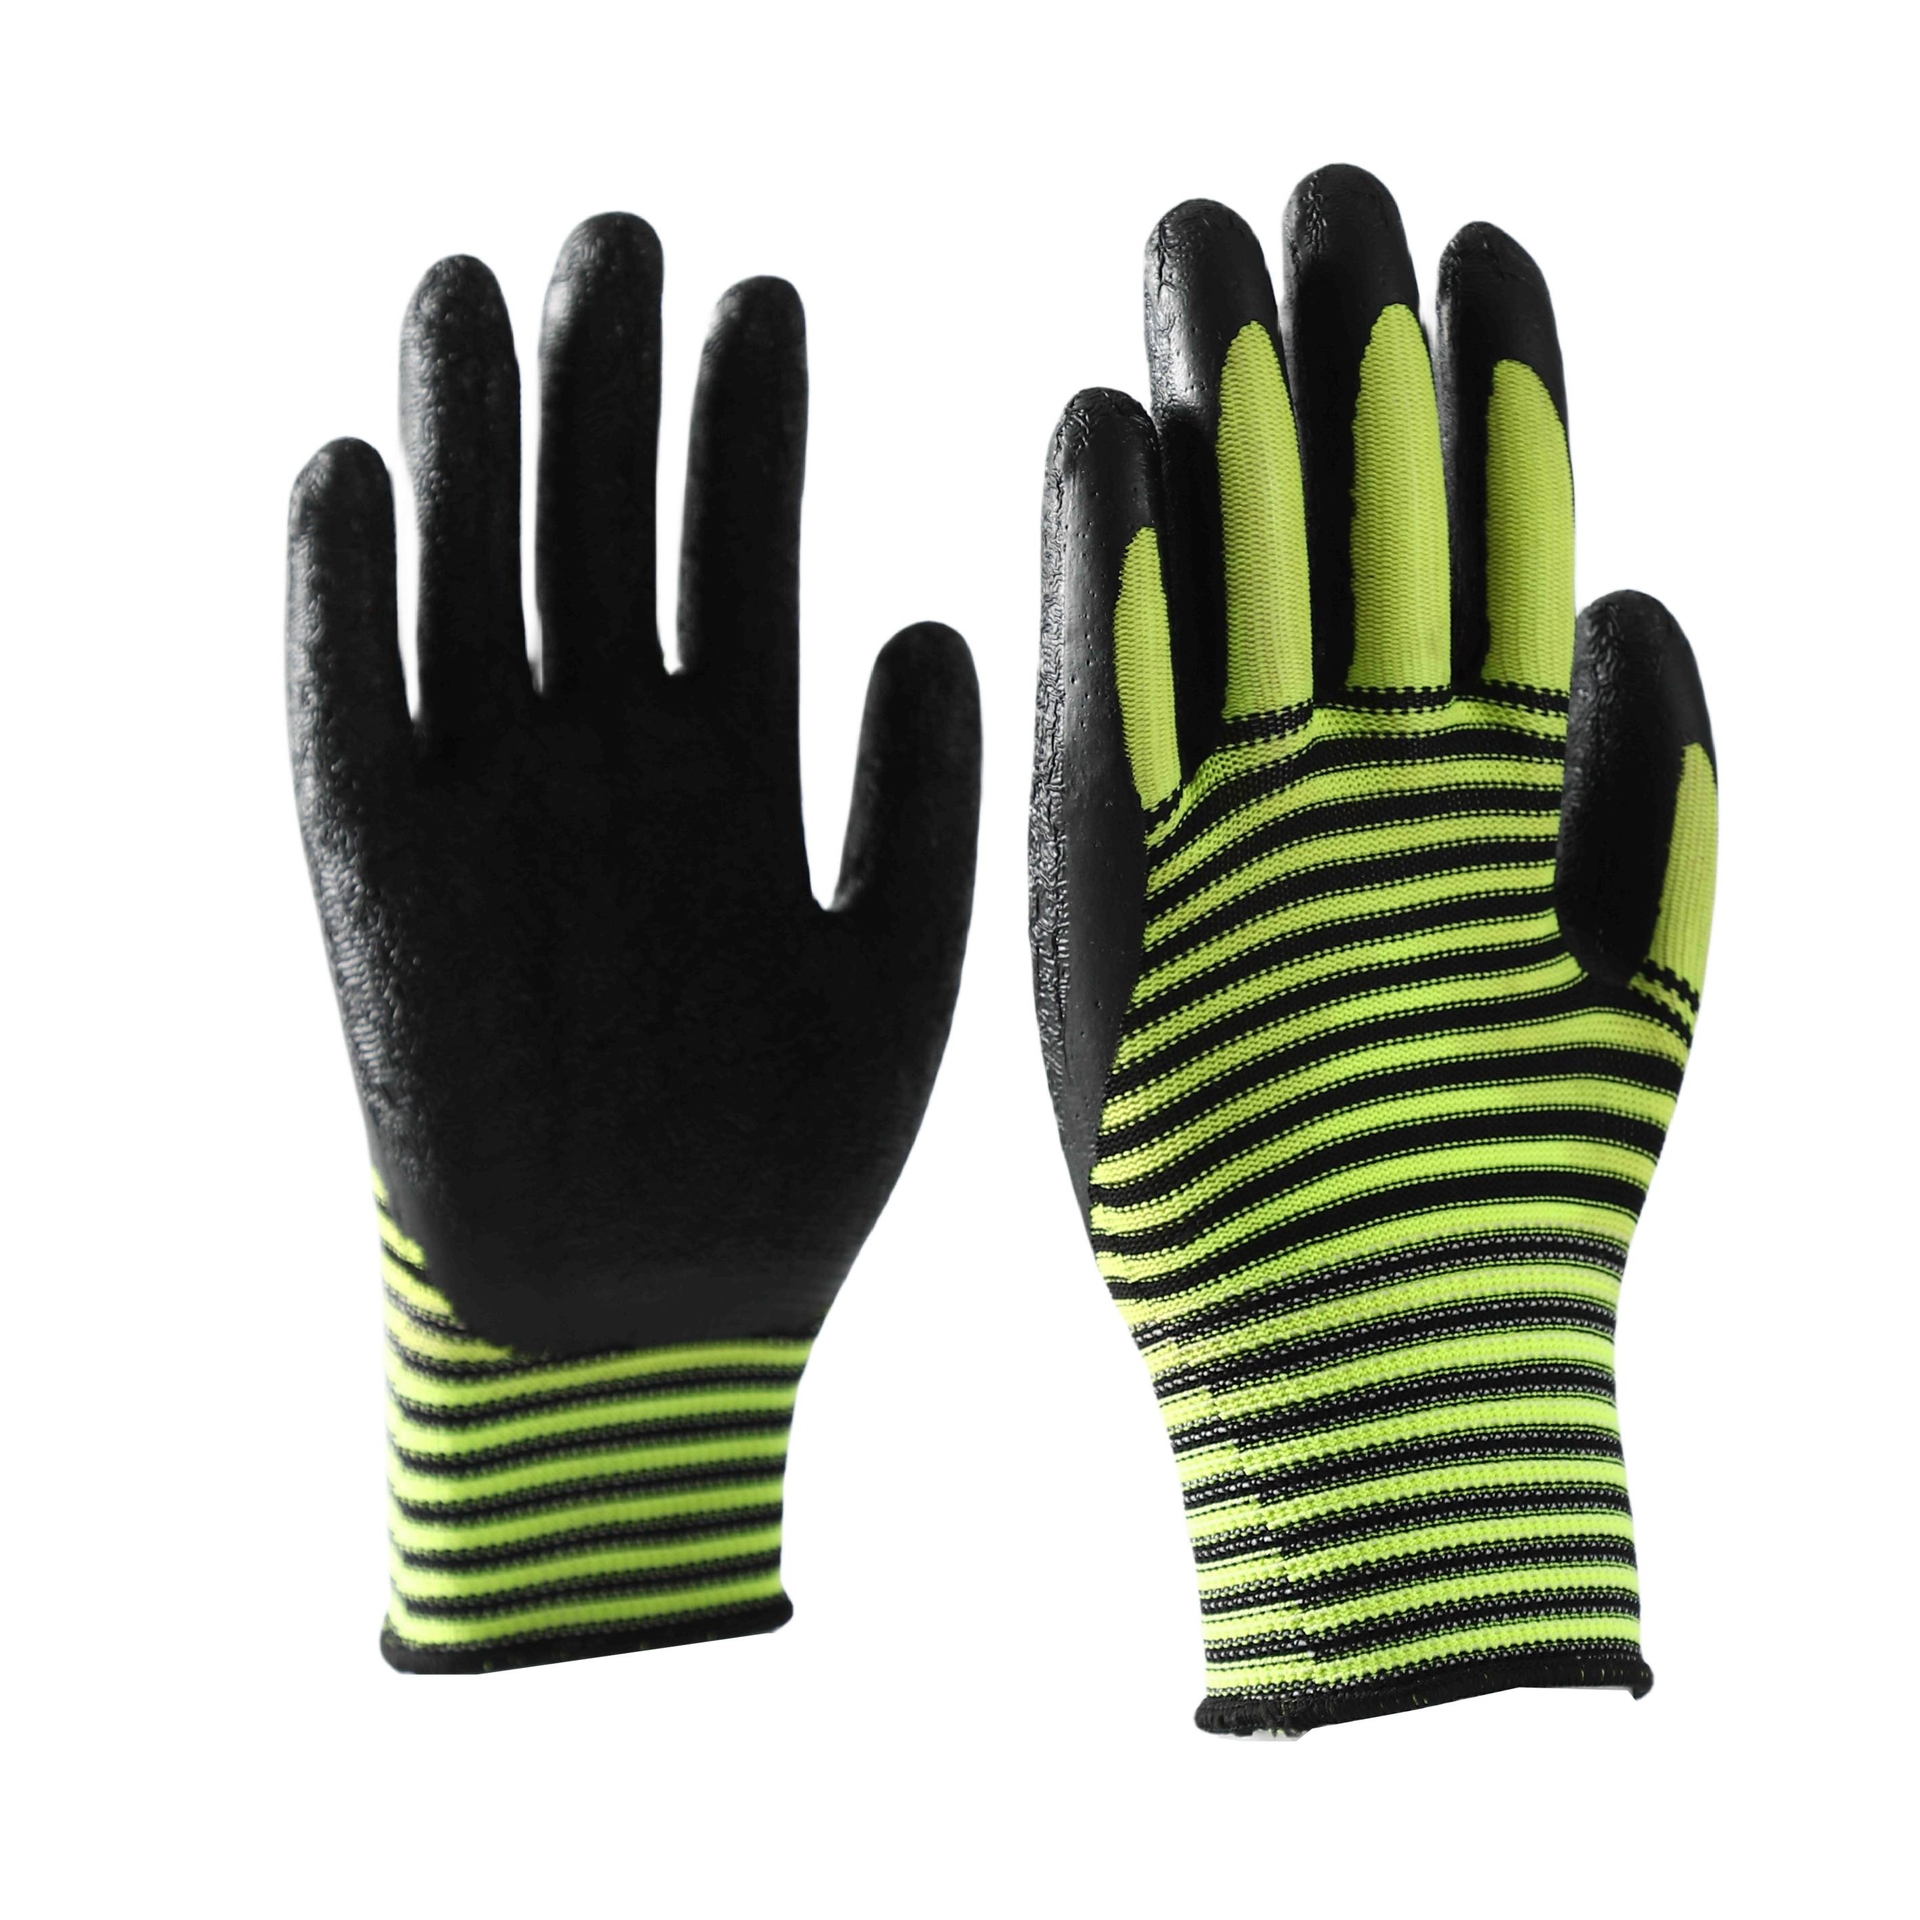                 Pattern polyester with gray crinkle latex coated gloves            